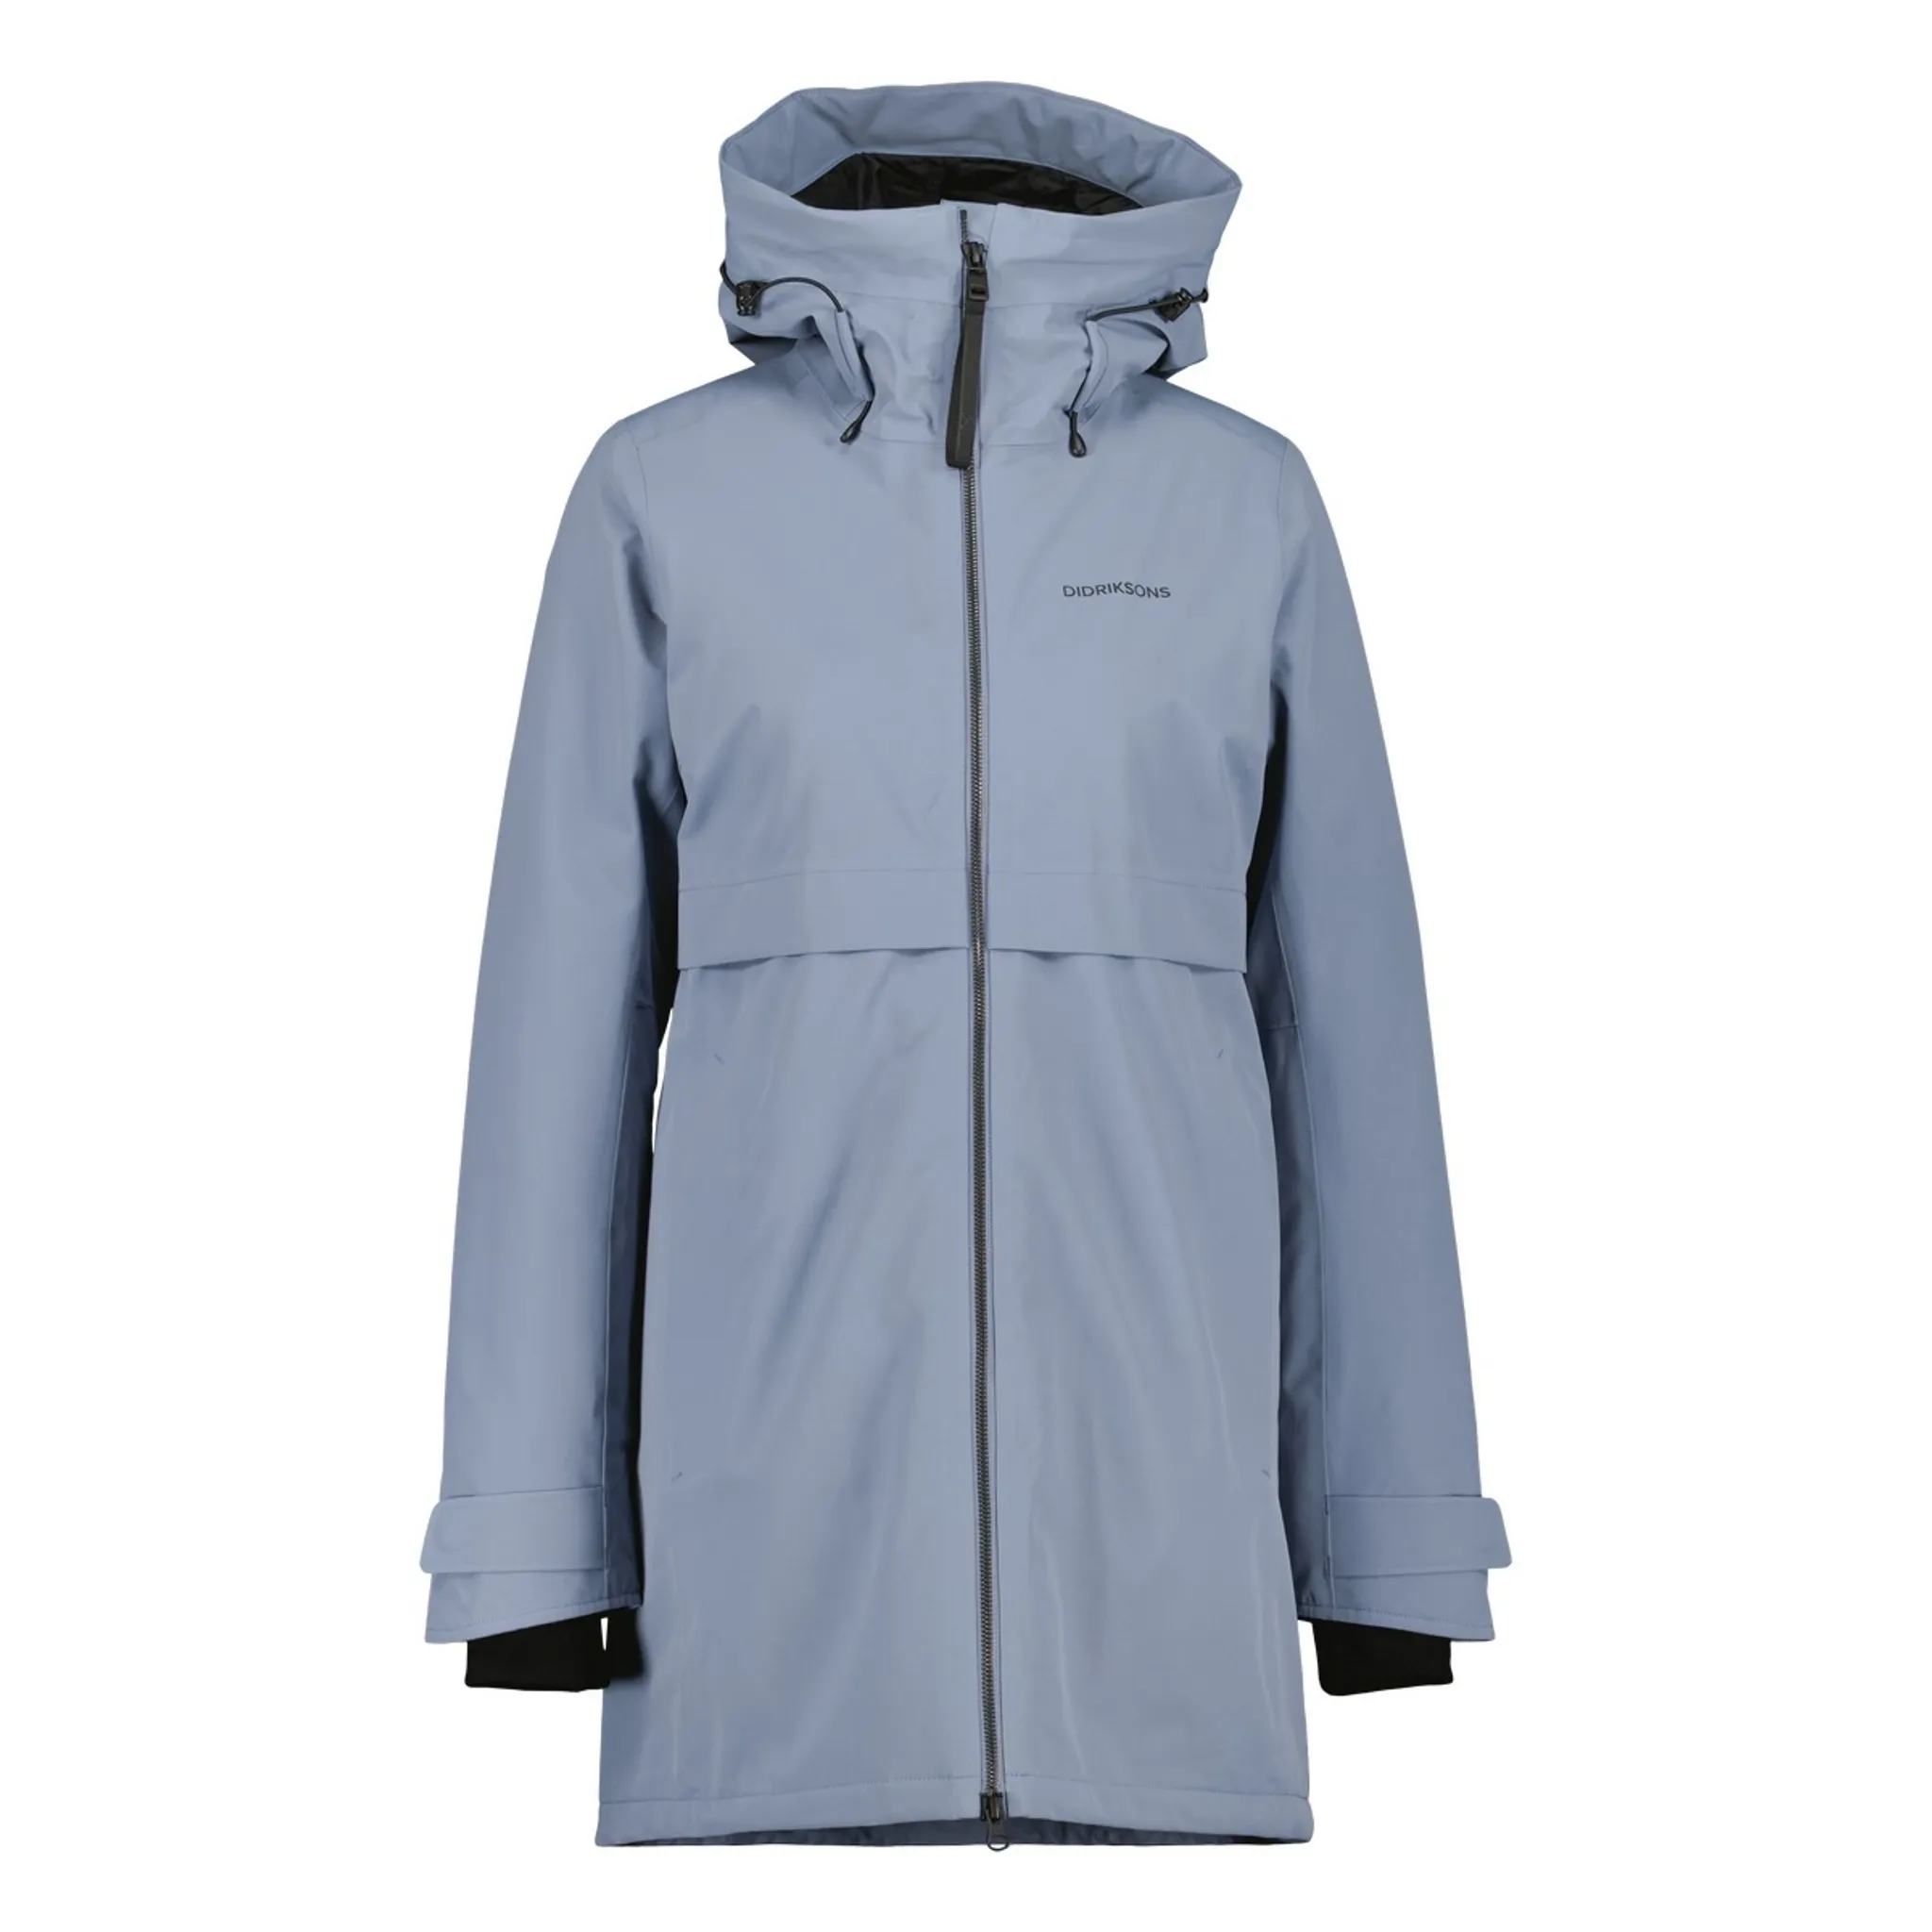 G05 5 G05 Didriksons WNS 46 Helle Parka